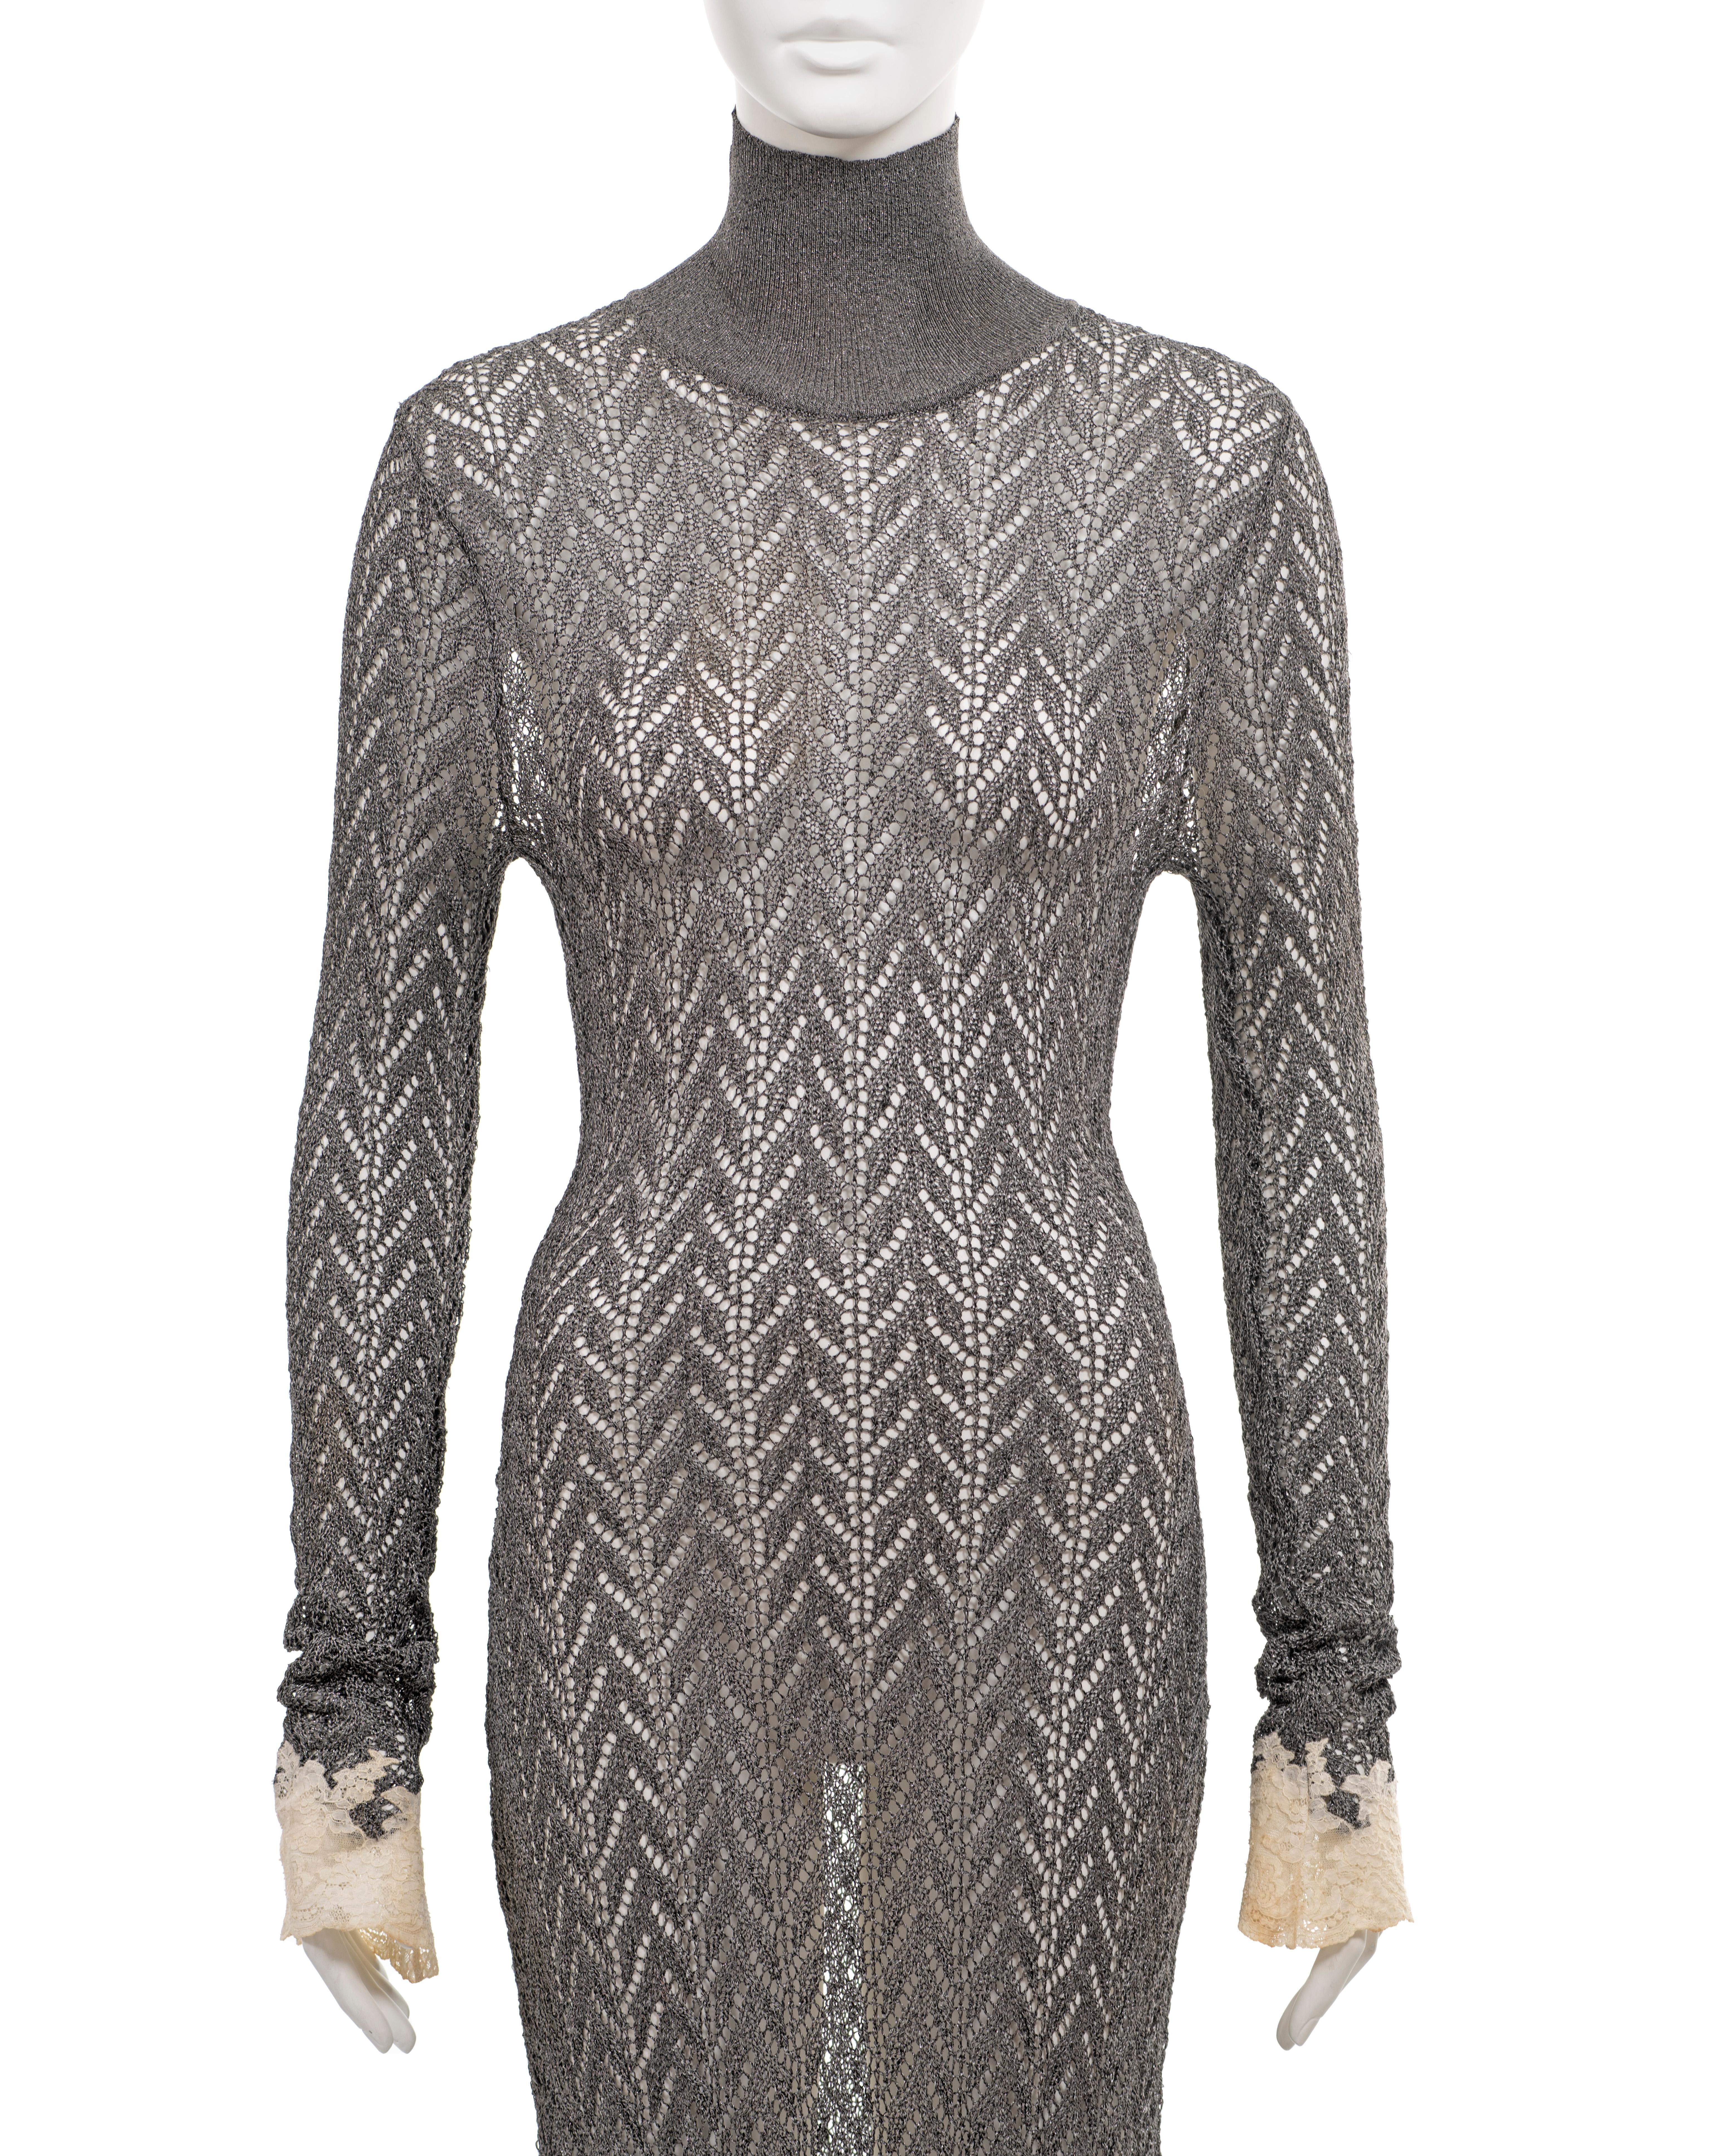 Christian Dior by John Galliano silver open-knit dress with lace trim, fw 1998 In Good Condition For Sale In London, GB